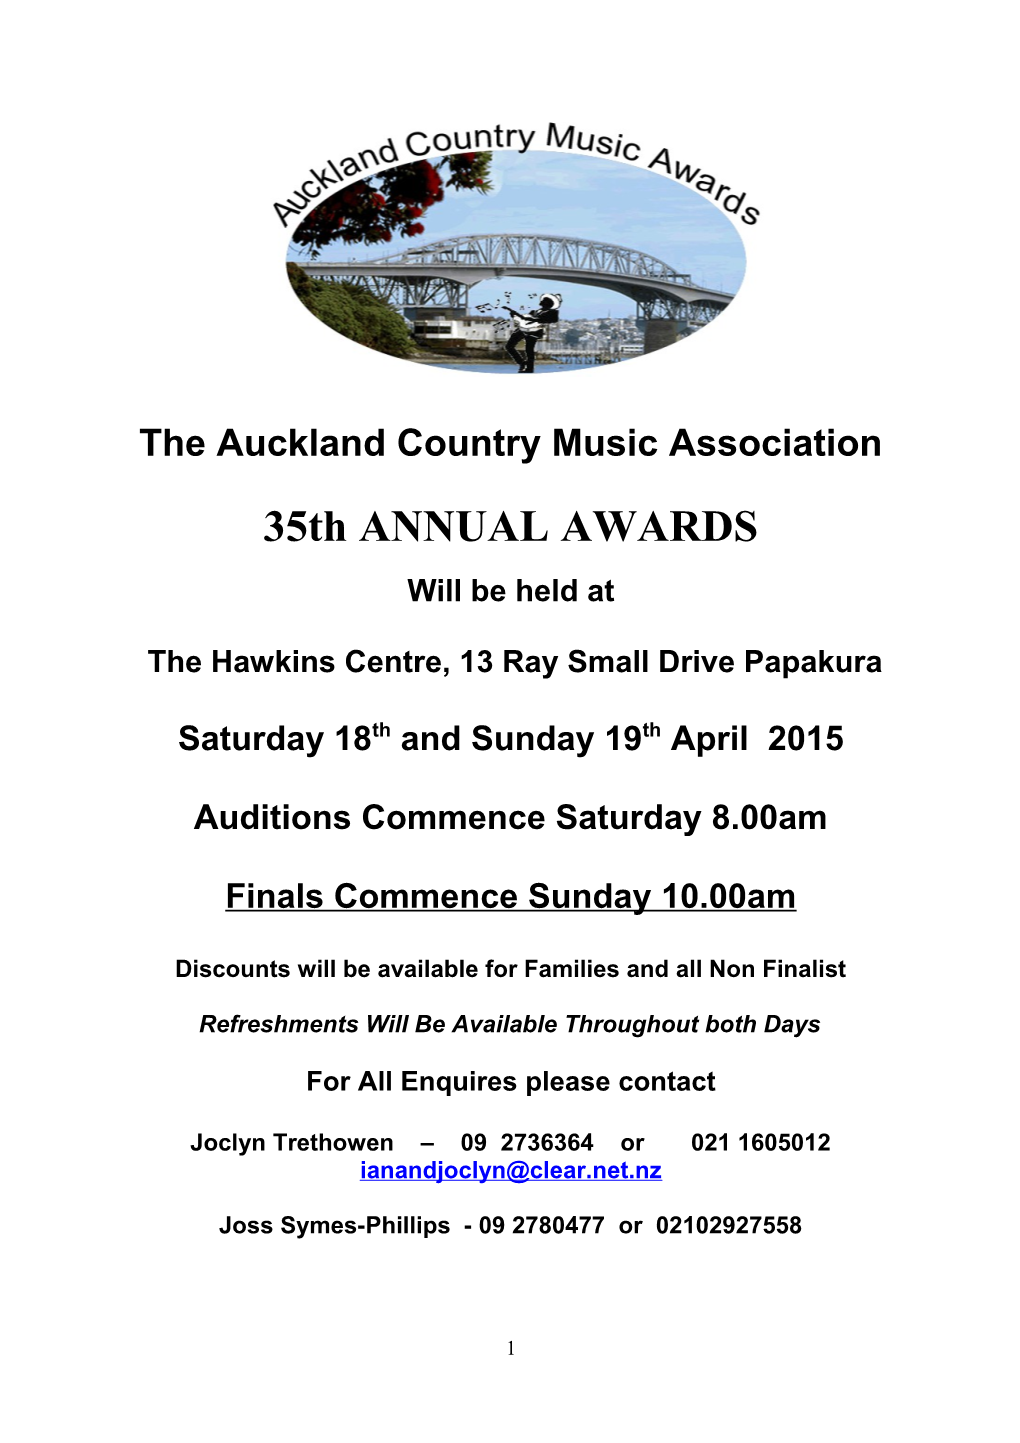 Auckland Country Music Awards Official Entry Form